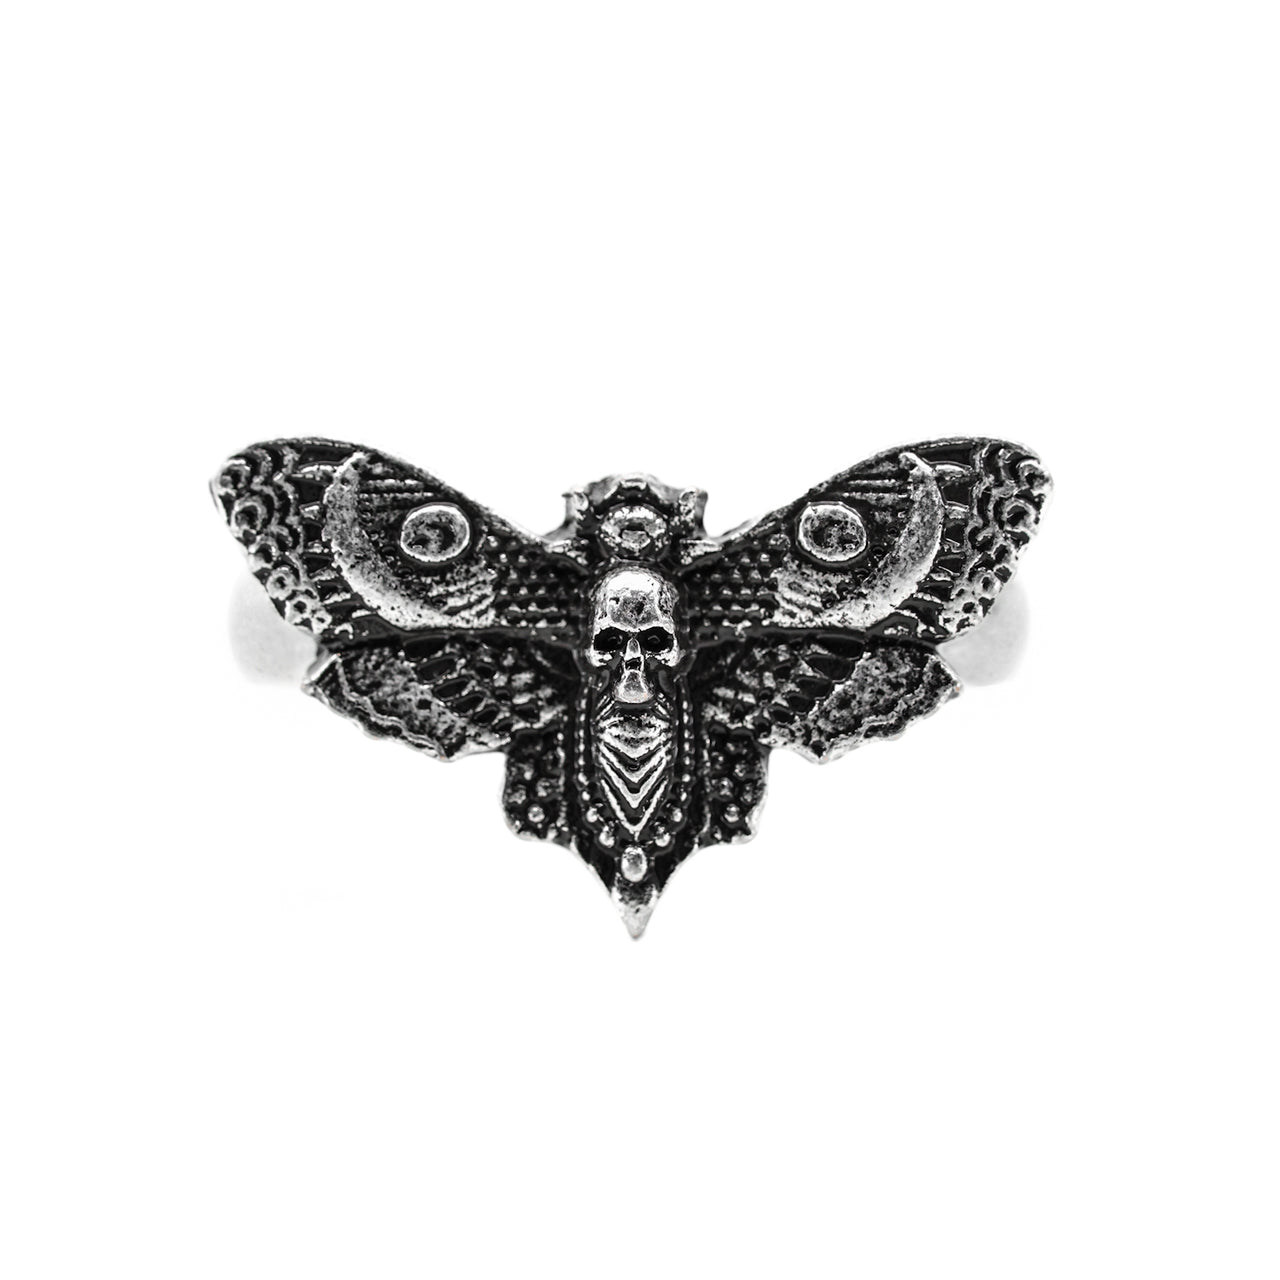 King's Head Moth Ring - Black Feather Design